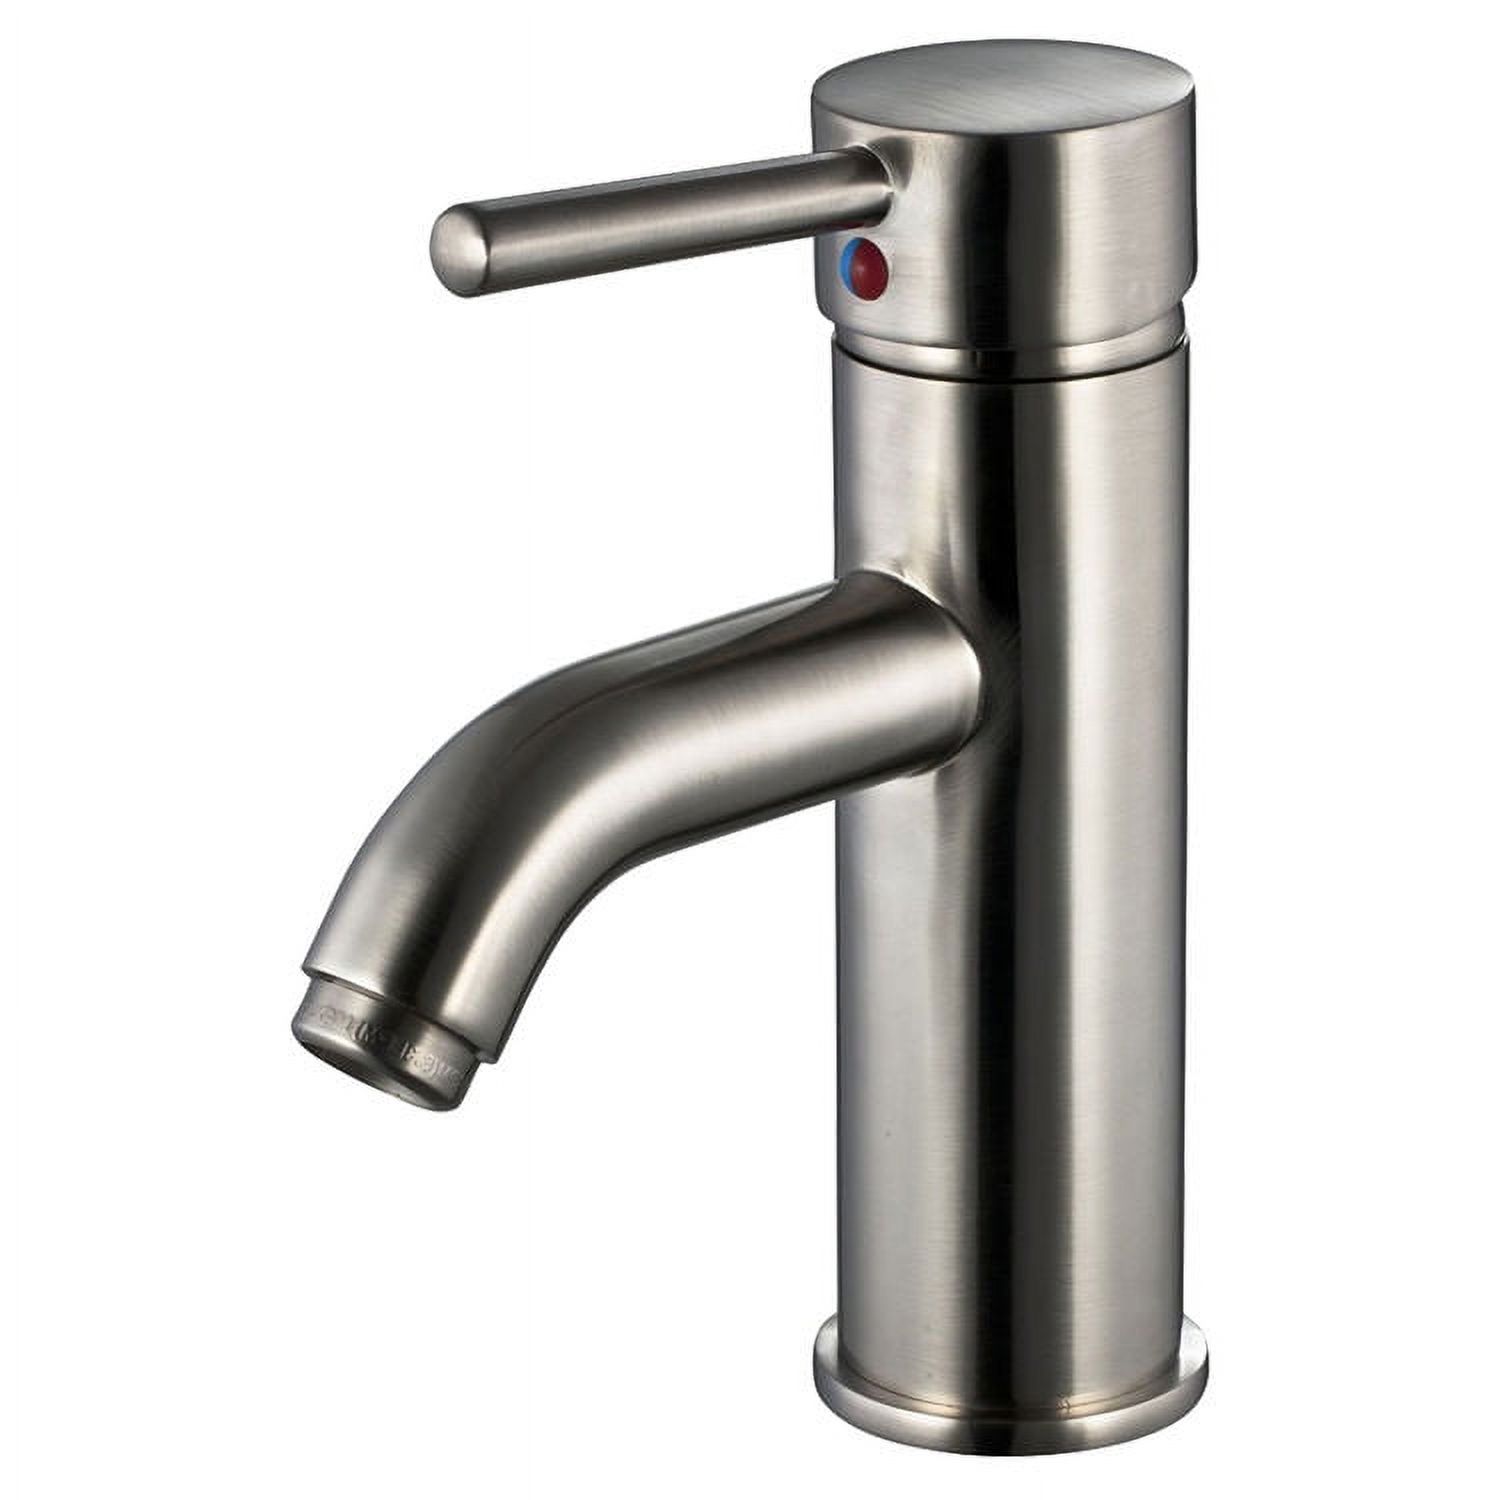 Ultra Faucets UF36503 Euro One-Handle Bathroom Faucet, Brushed Nickel - image 1 of 5